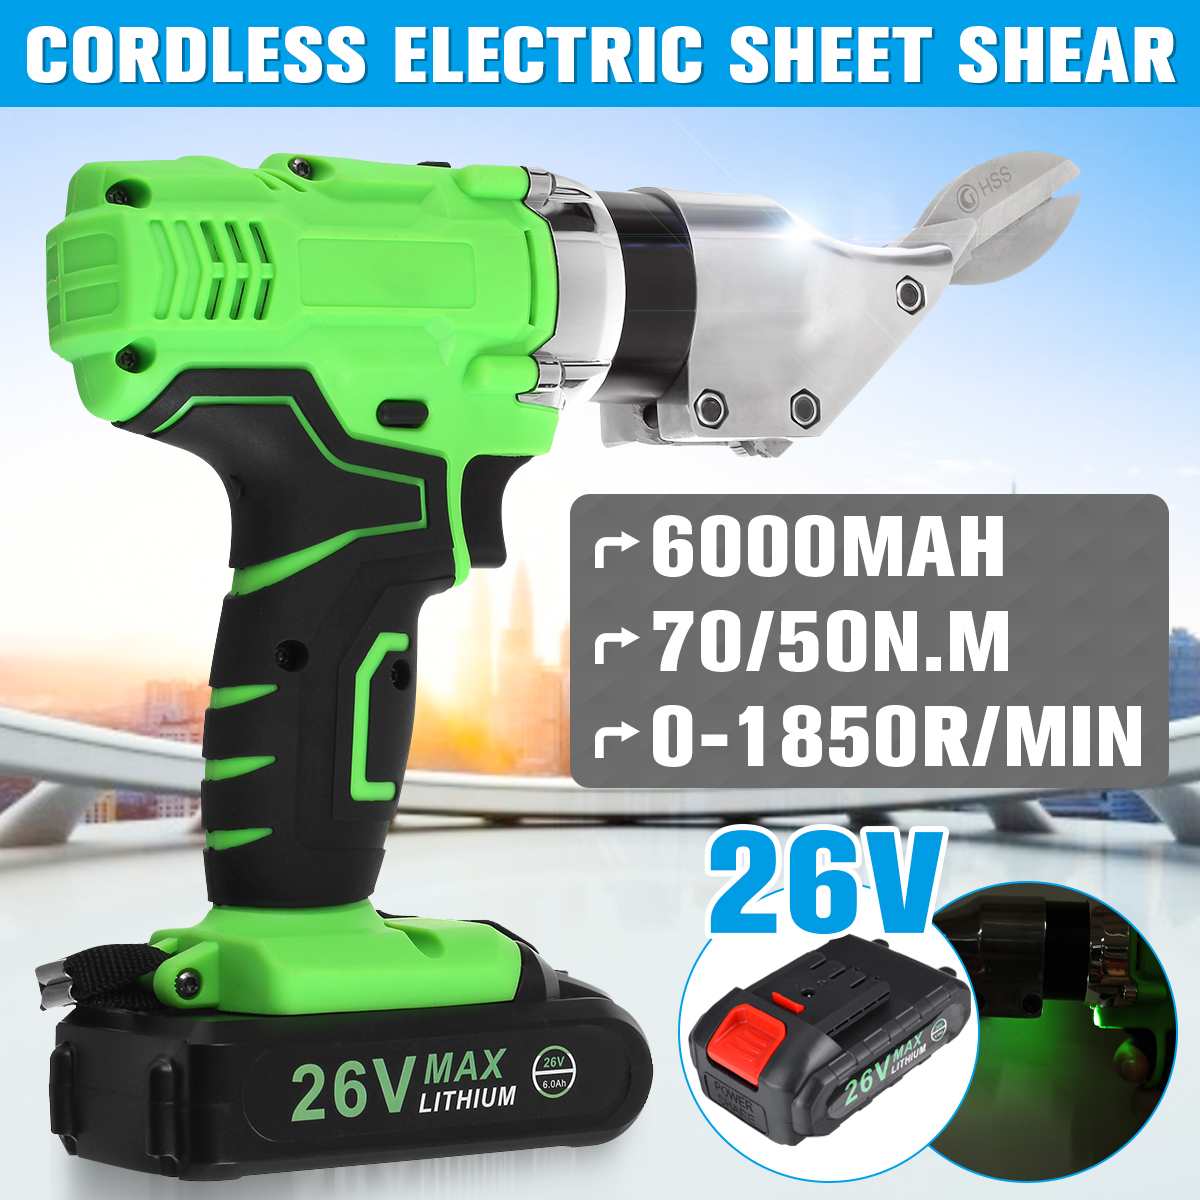 990W 26V Portable Cordless Rechargeable Electric Scissor Metal Sheet Shear Cutter Scissors Power Tool 26V With 6000mAh Battery